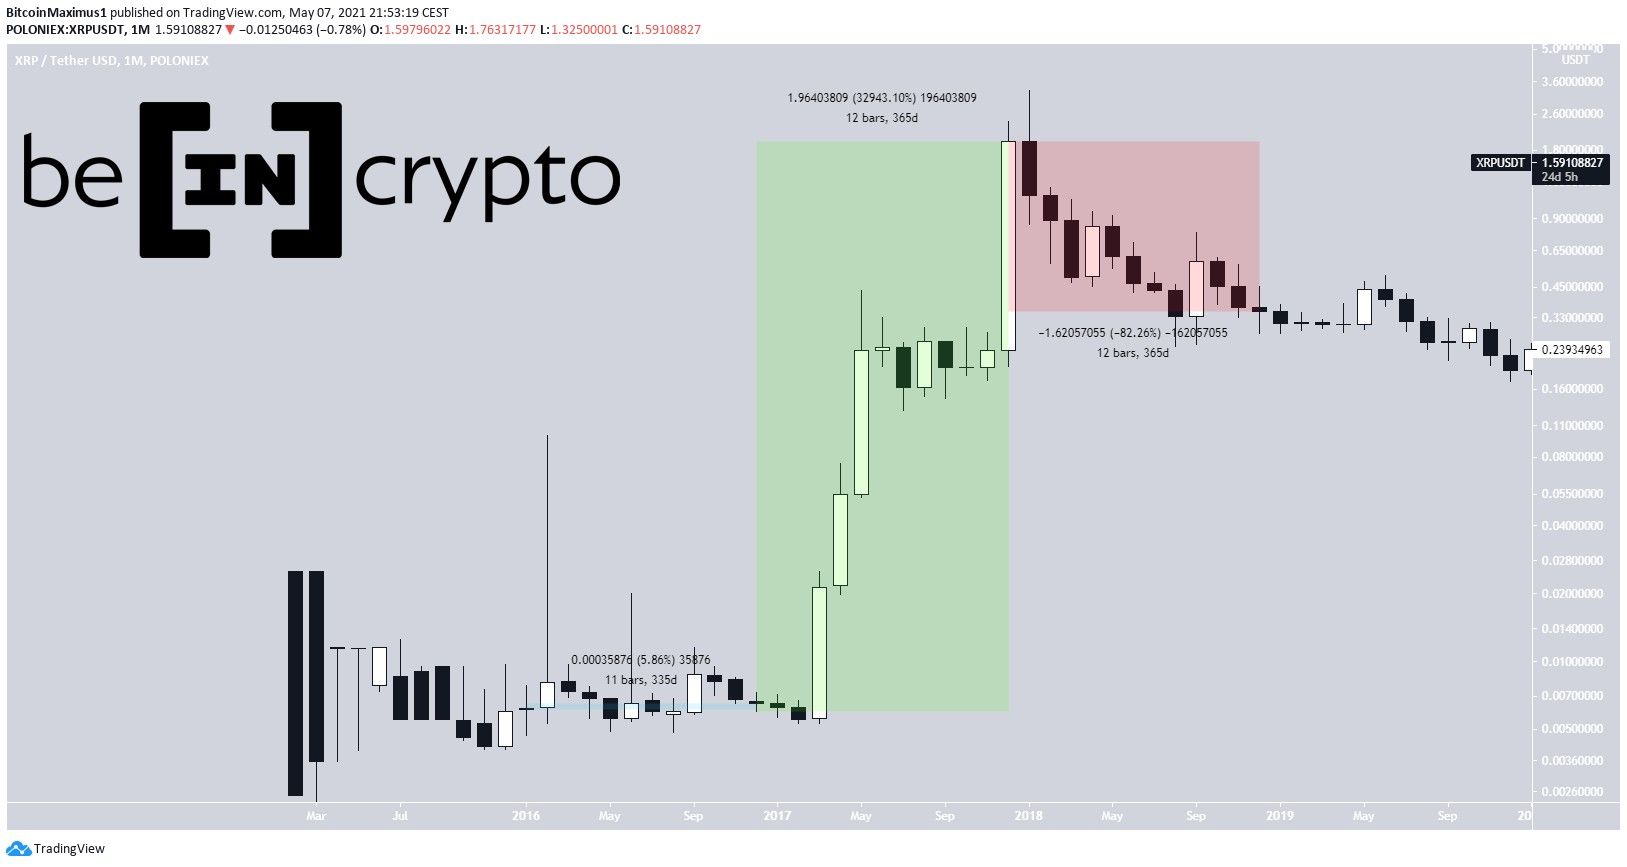 XRP Historical Yearly Price Movement Overview - BeInCrypto